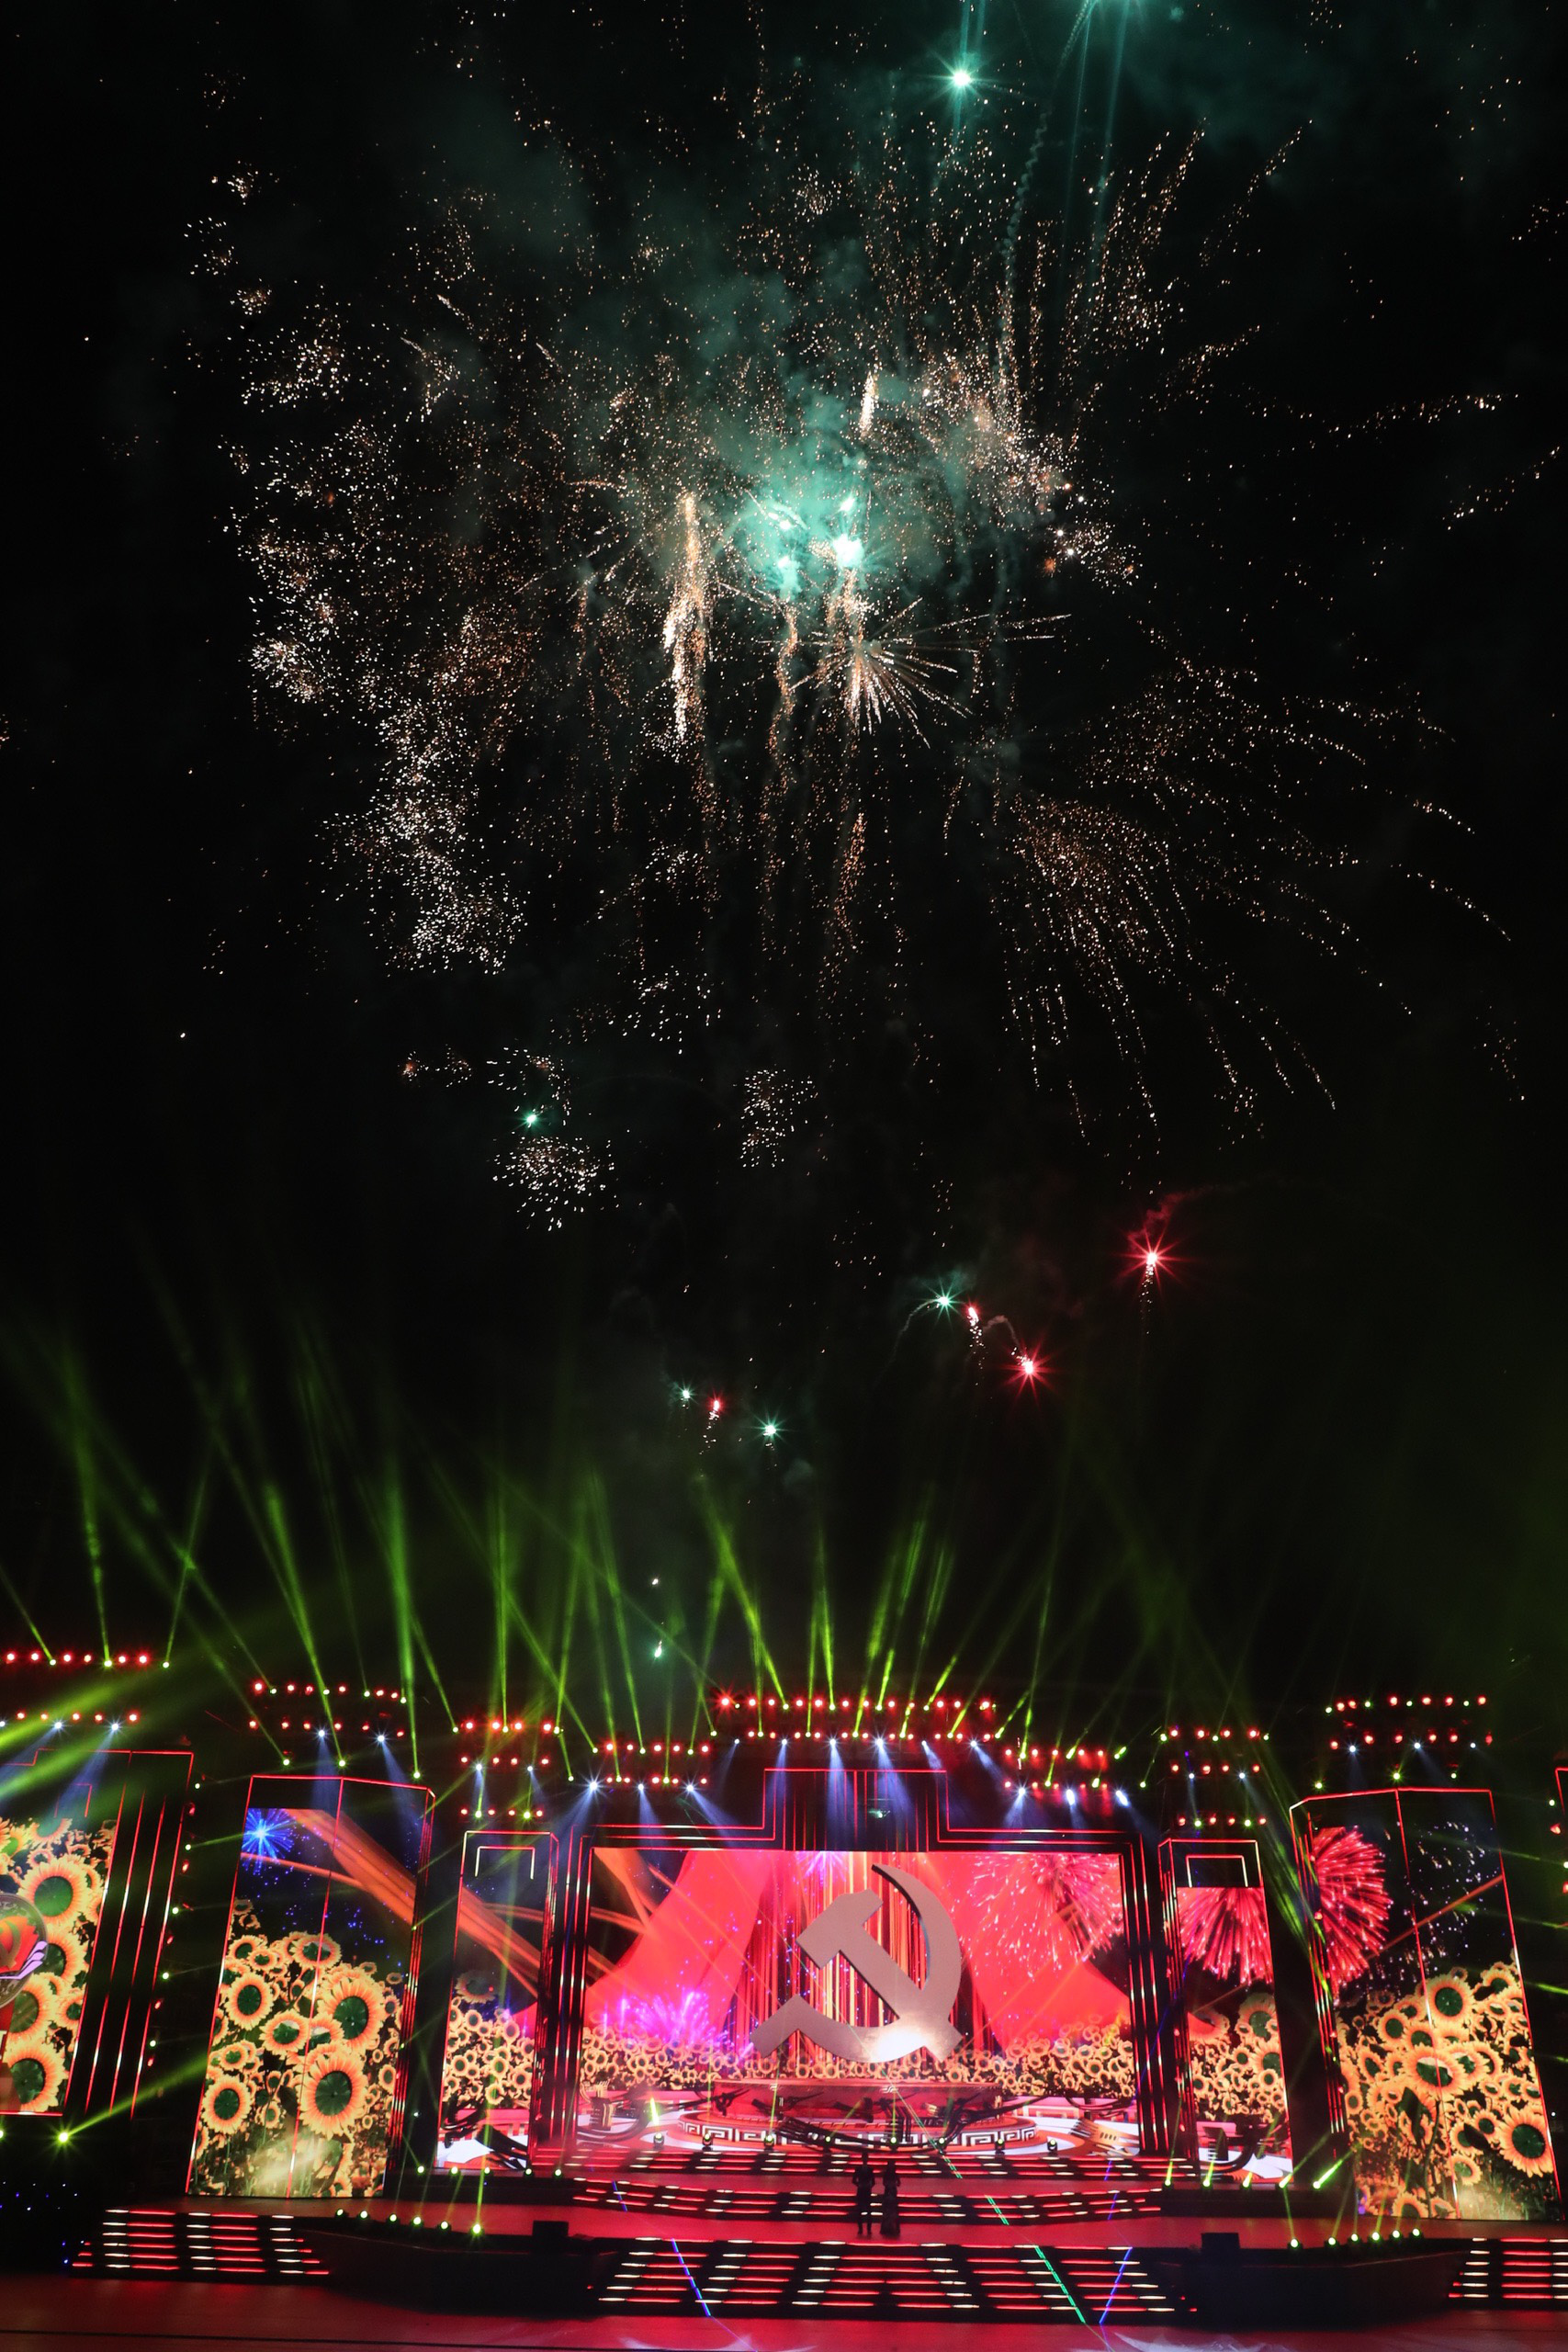 A firework display takes place prior to the music show in Hanoi, February 2, 2021. Photo: Nguyen Quang Phuc / Tuoi Tre